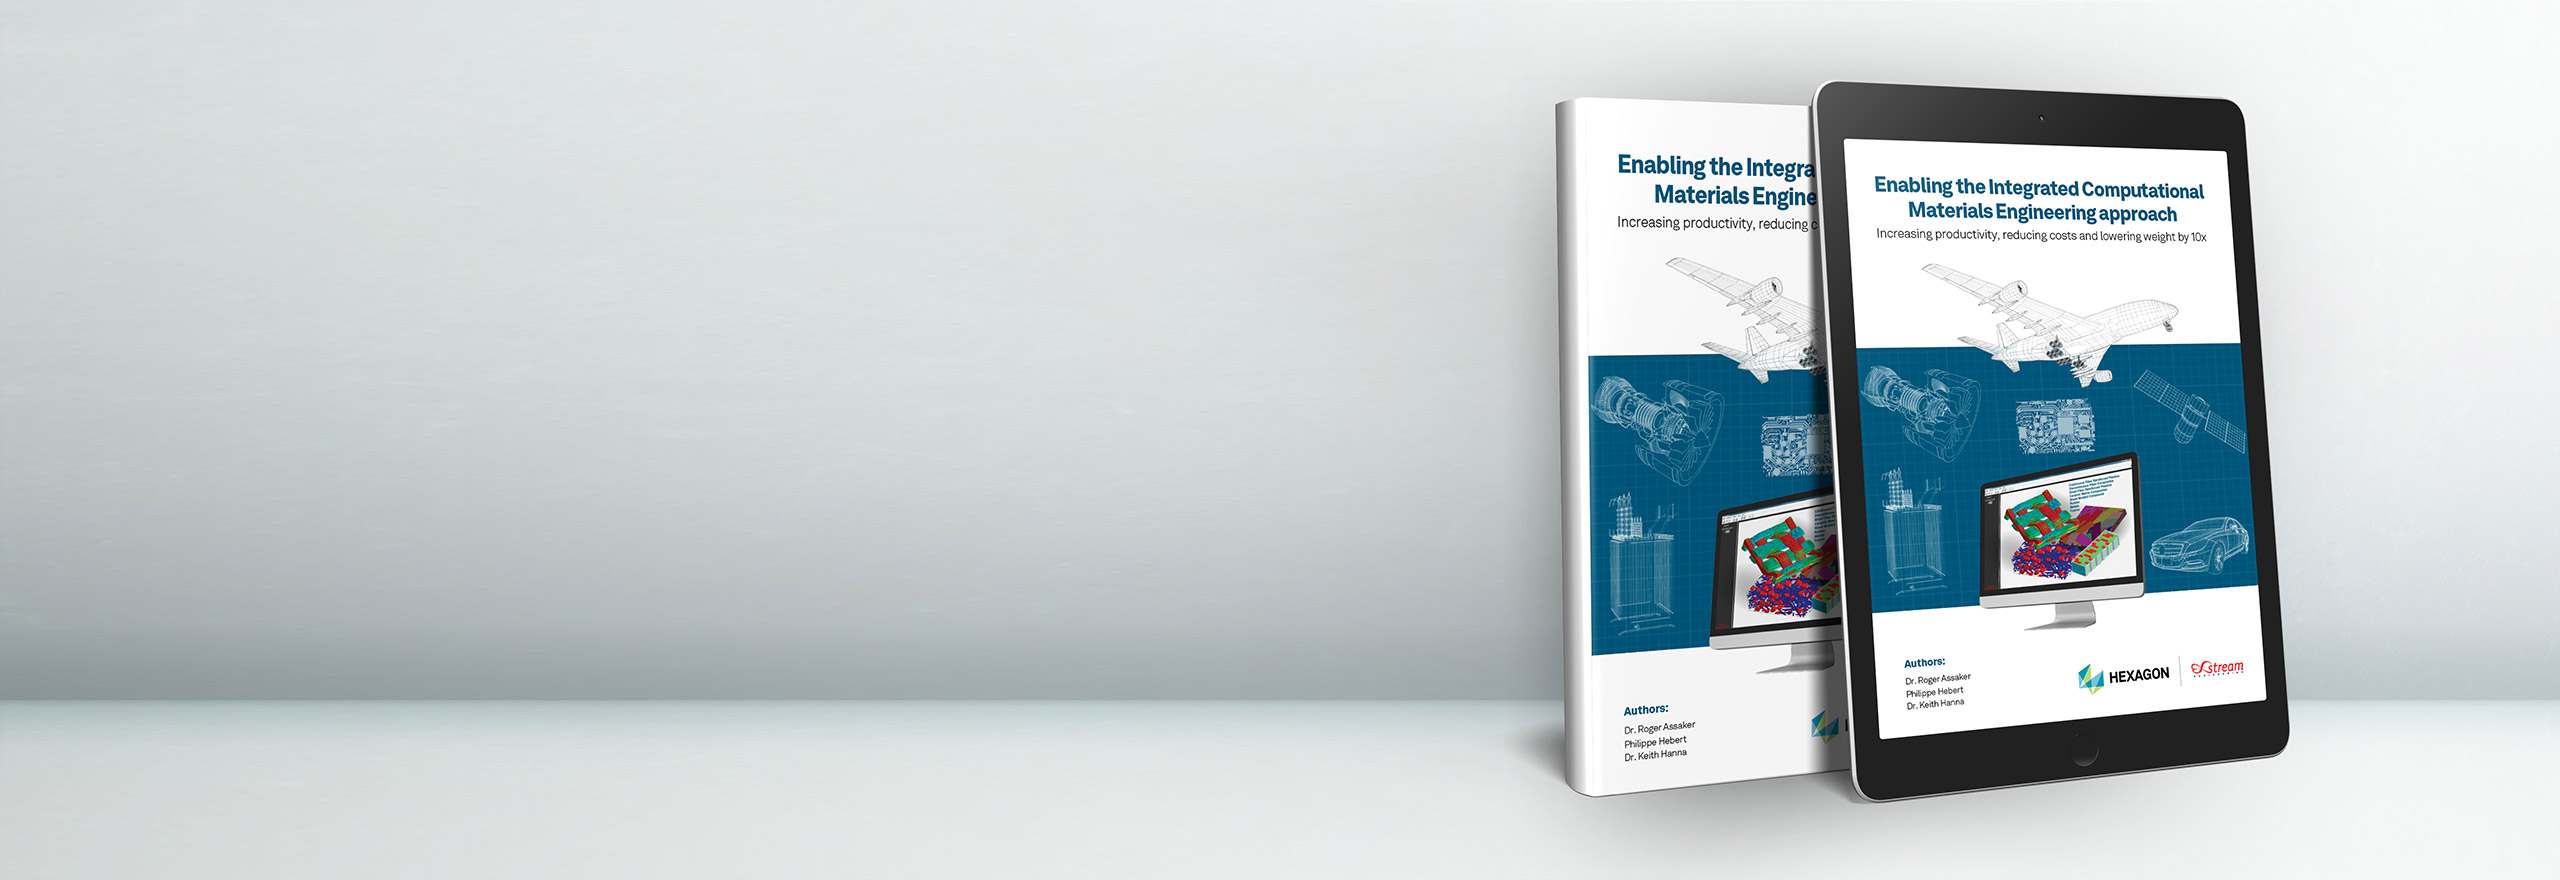 10X ICME eBook: Enabling the Integrated Computational Materials Engineering (ICME) approach